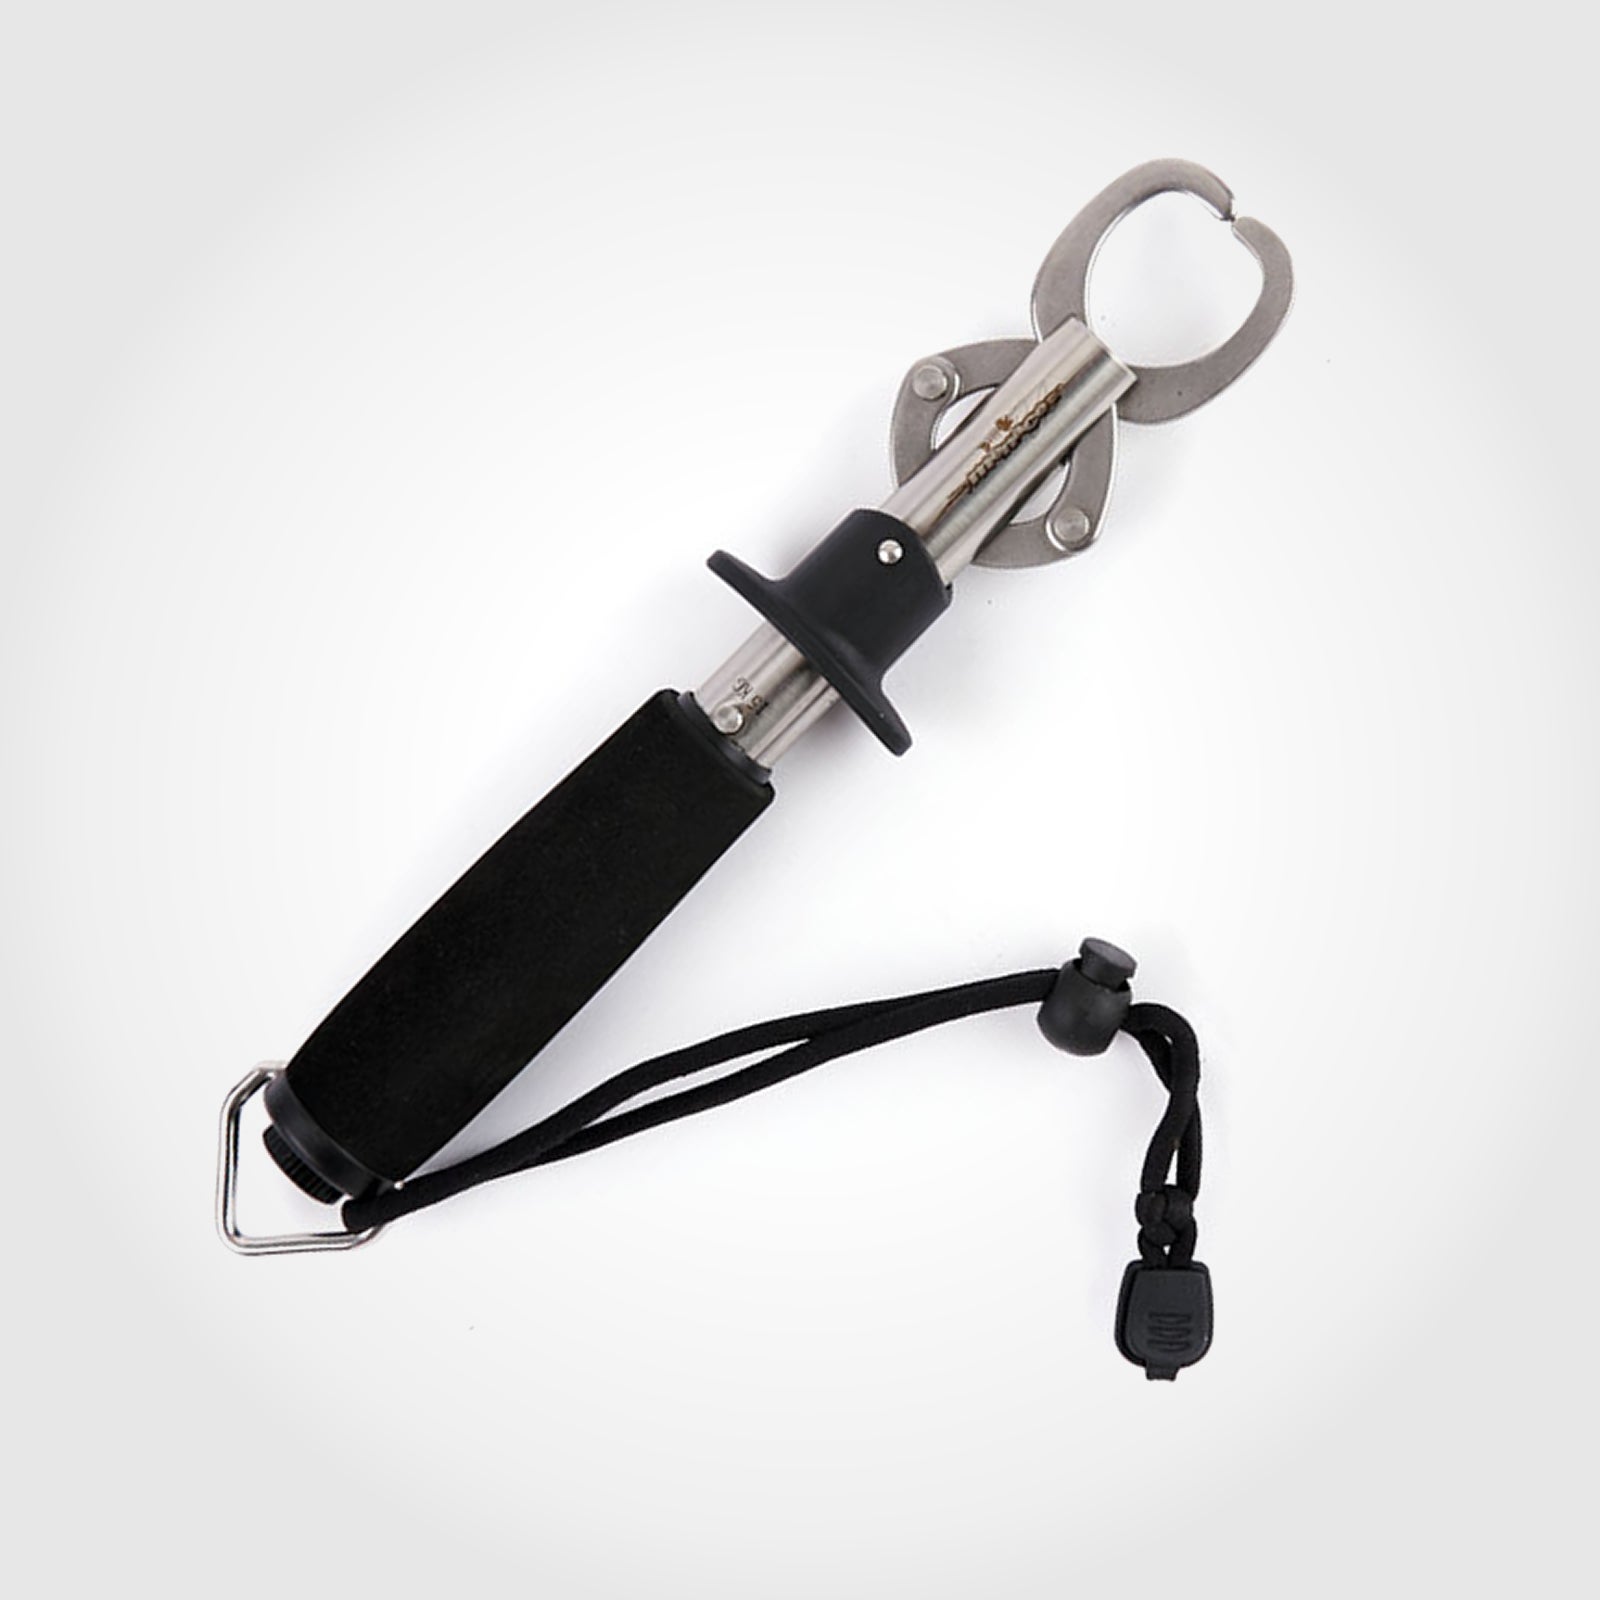 Stainless Steel Fishing LIP-GRIP with BUILT-IN WEIGHT SCALES Fish